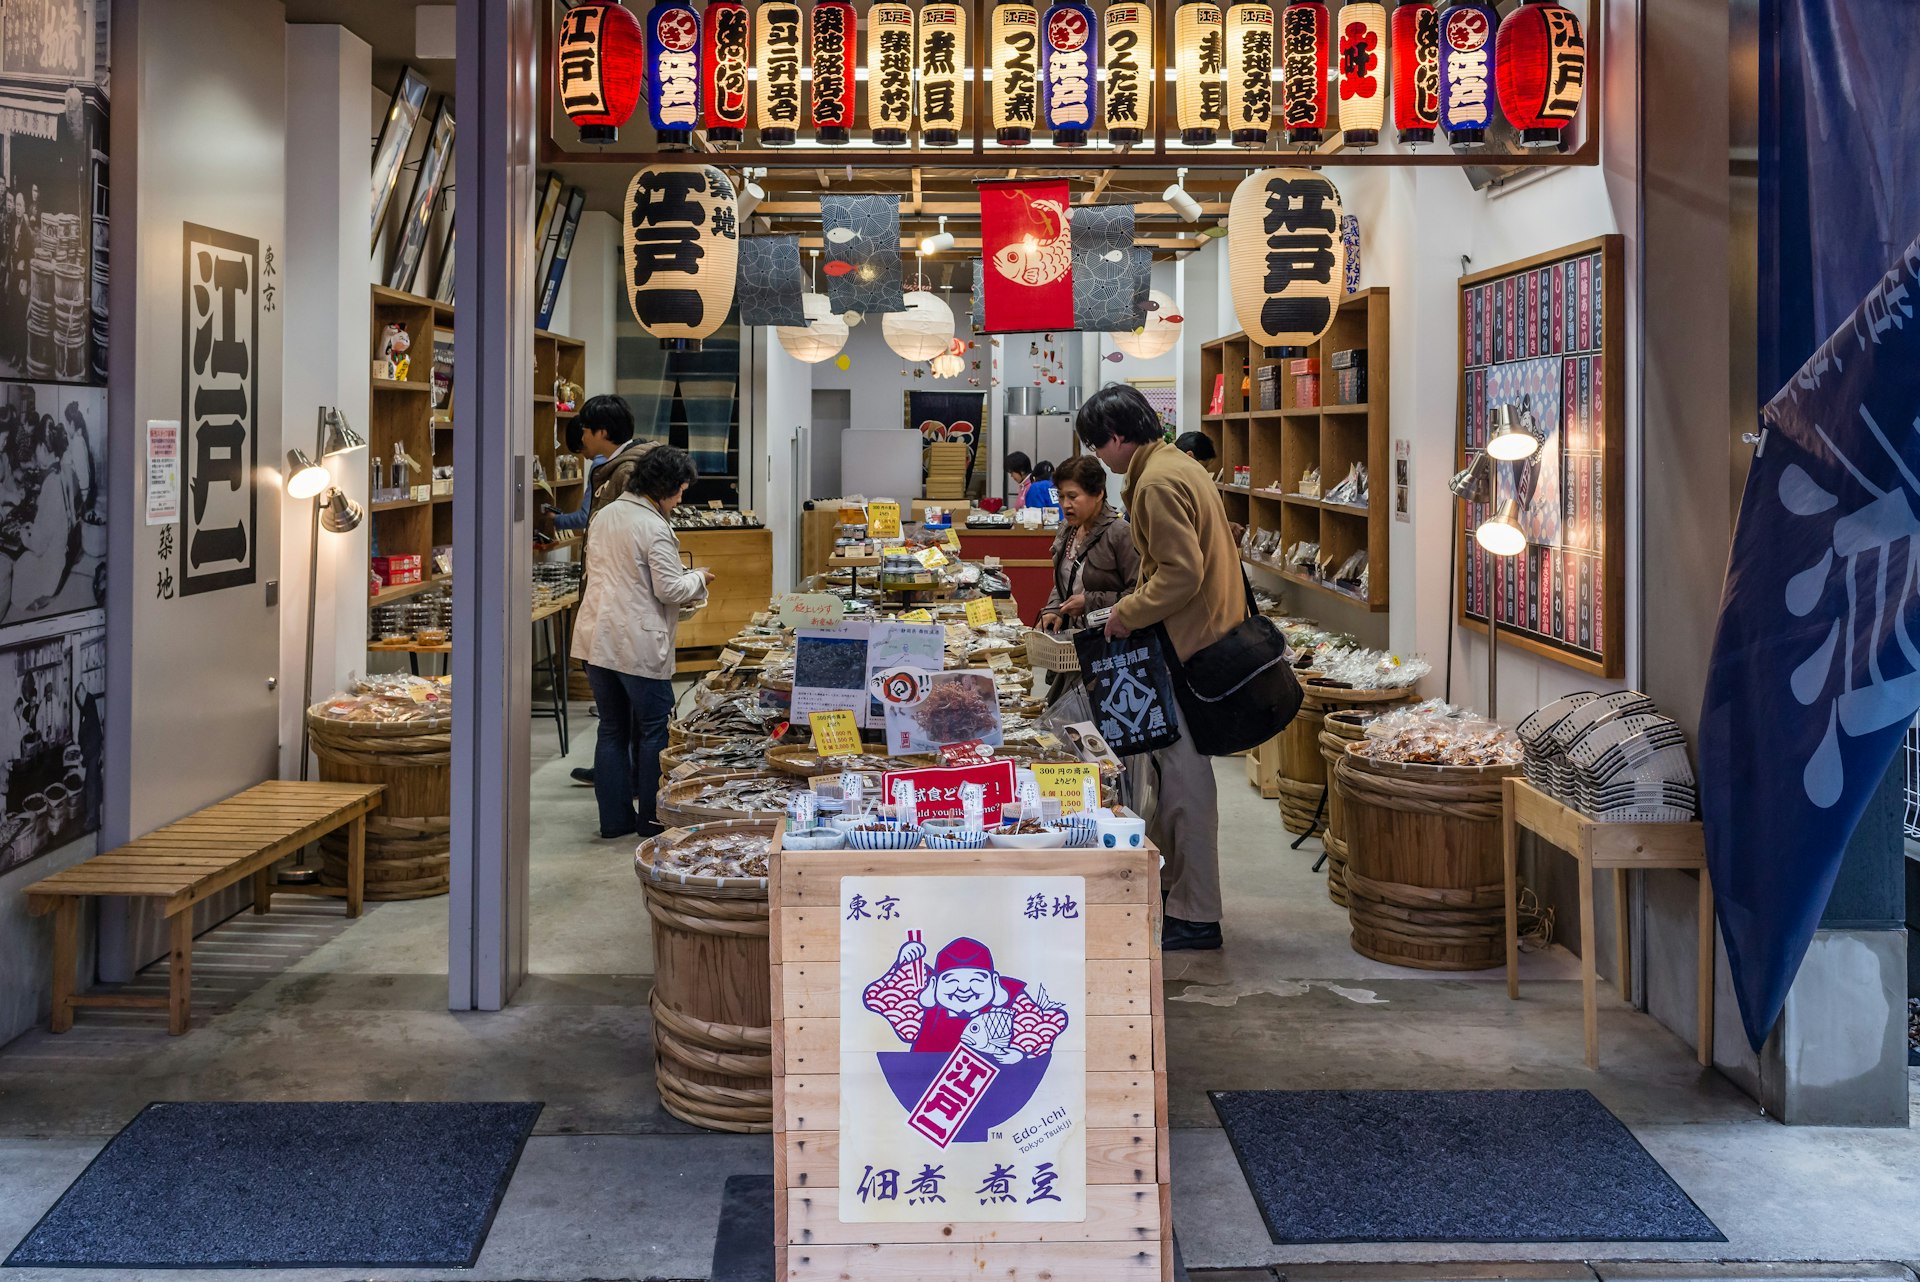 Shoppers browse and buy local products in one of the typical small shops located in the outer area of the Tsukiji Market, in Tokyo, Japan